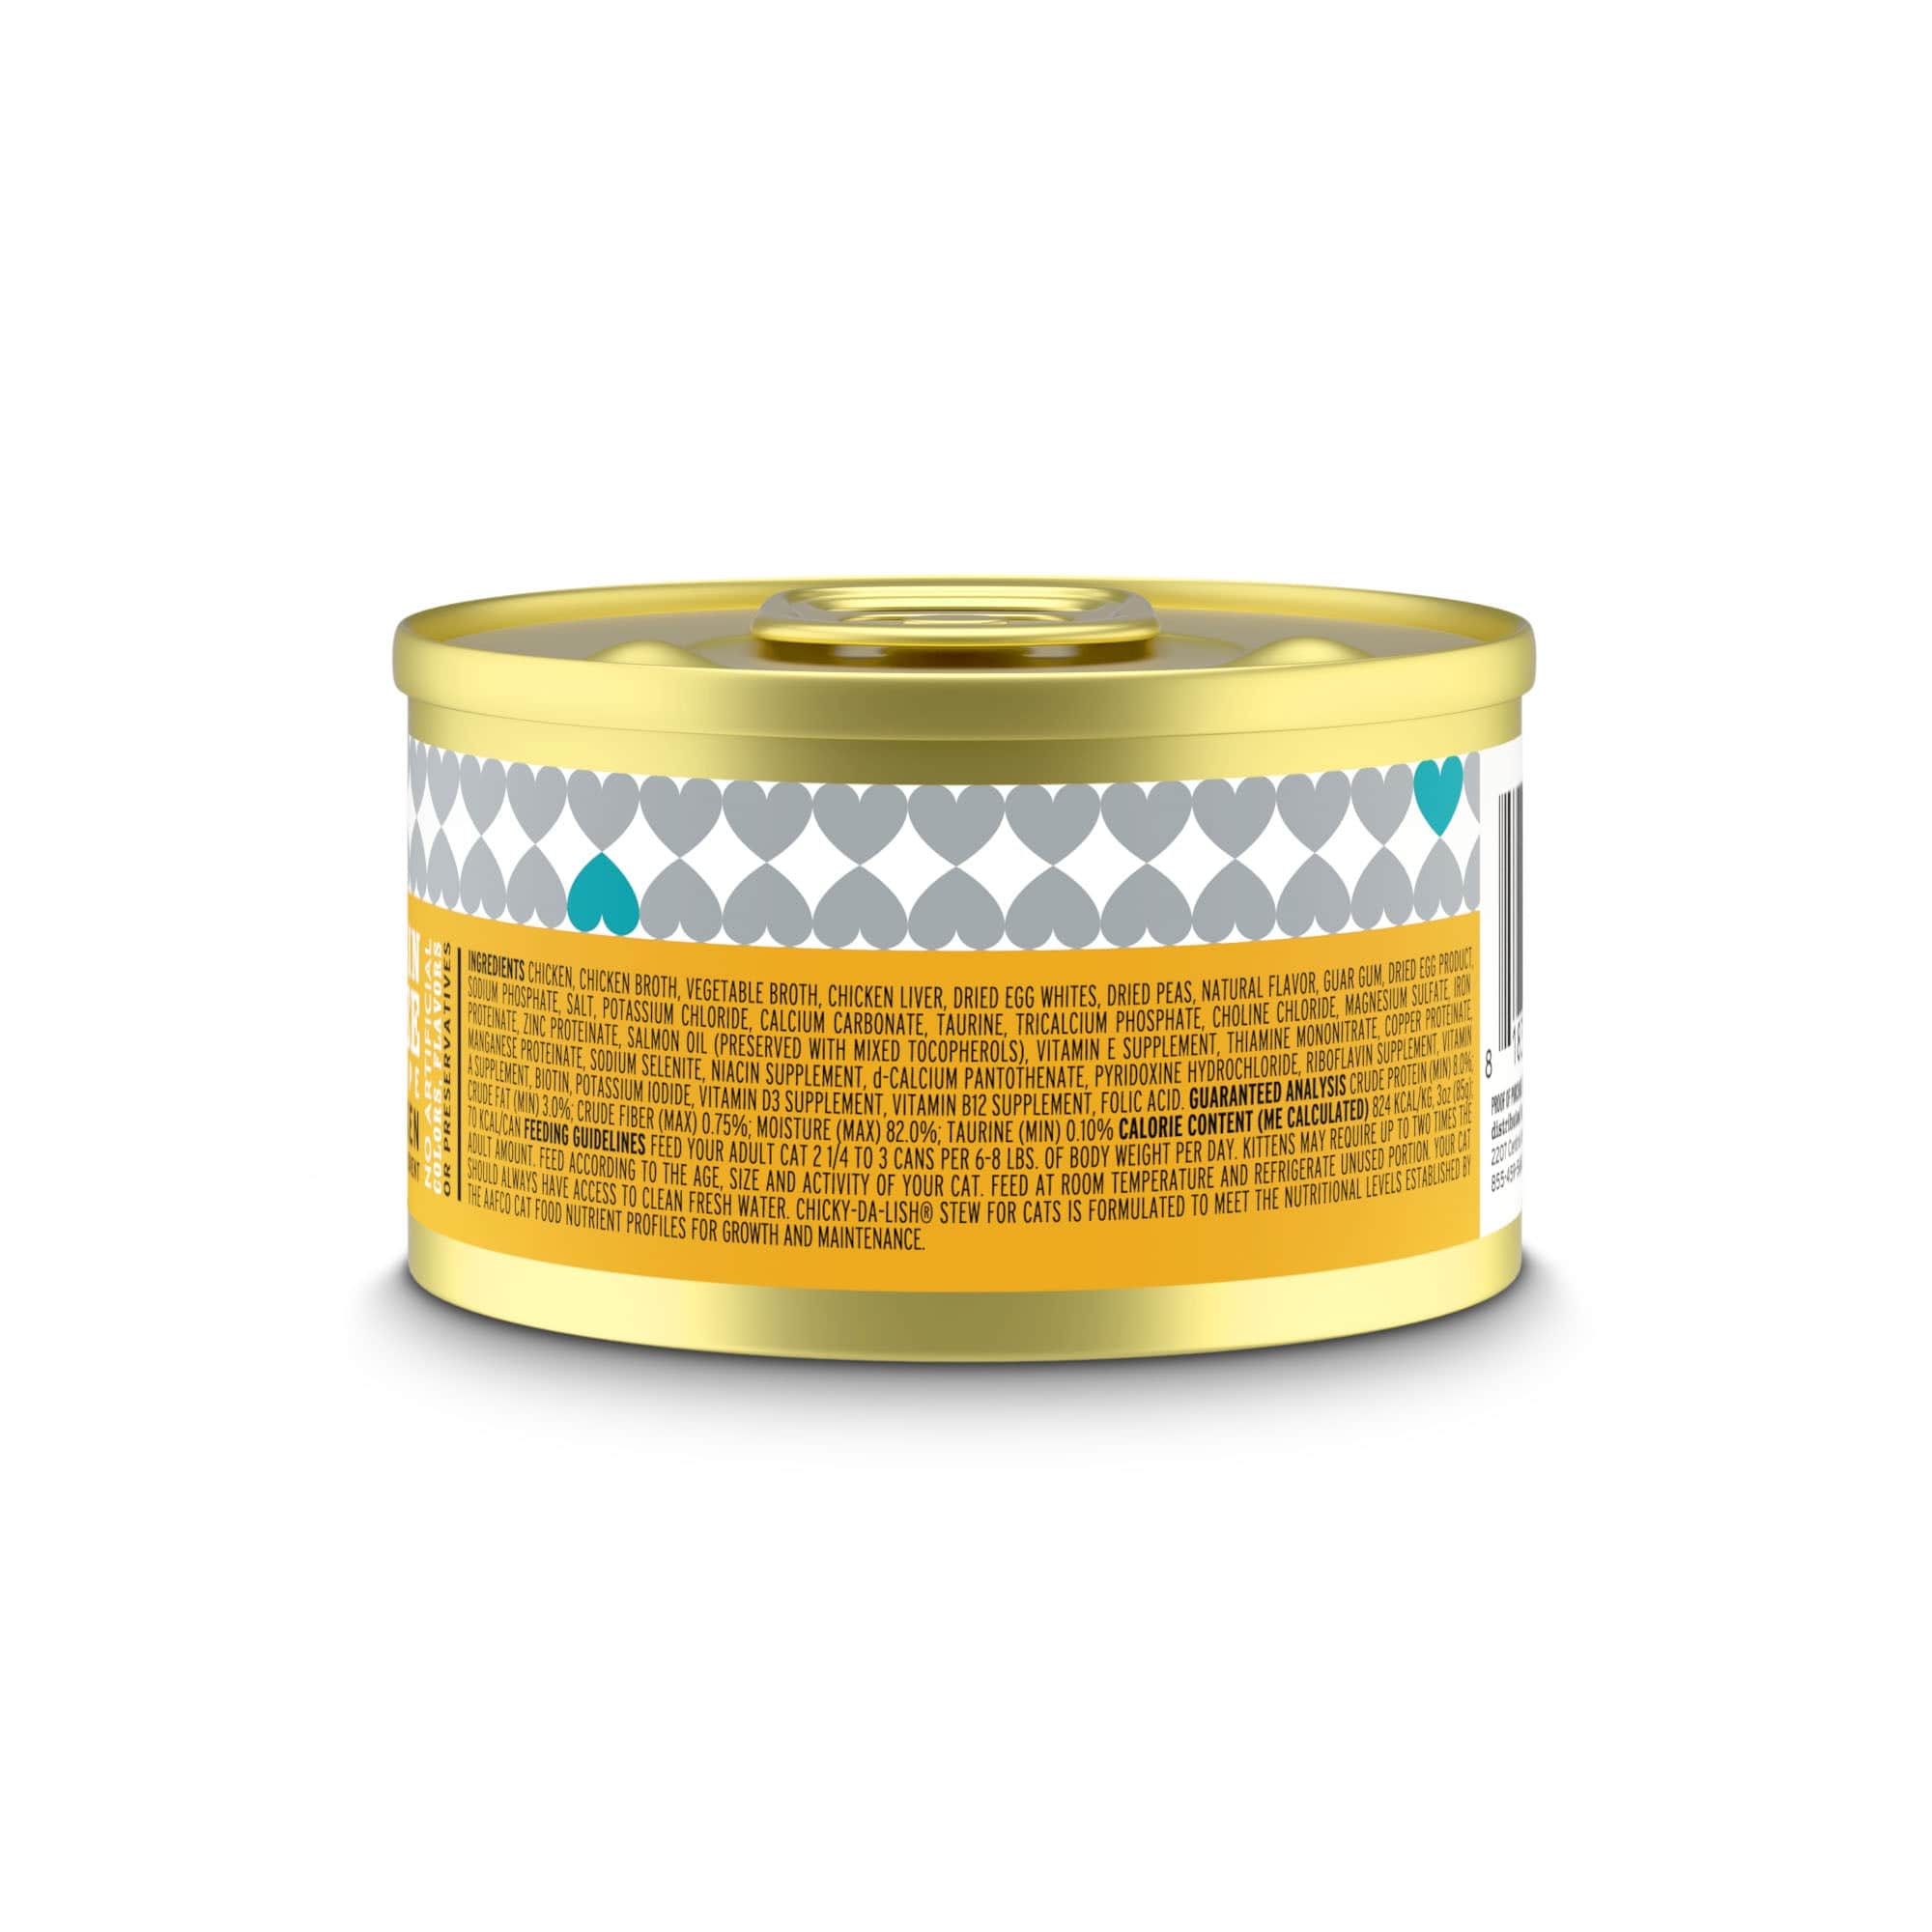 A can of Chicky-Da-Lish Stew cat food featuring a yellow label, packed with savory chicken stew for your feline friend's energy and nutrition needs.